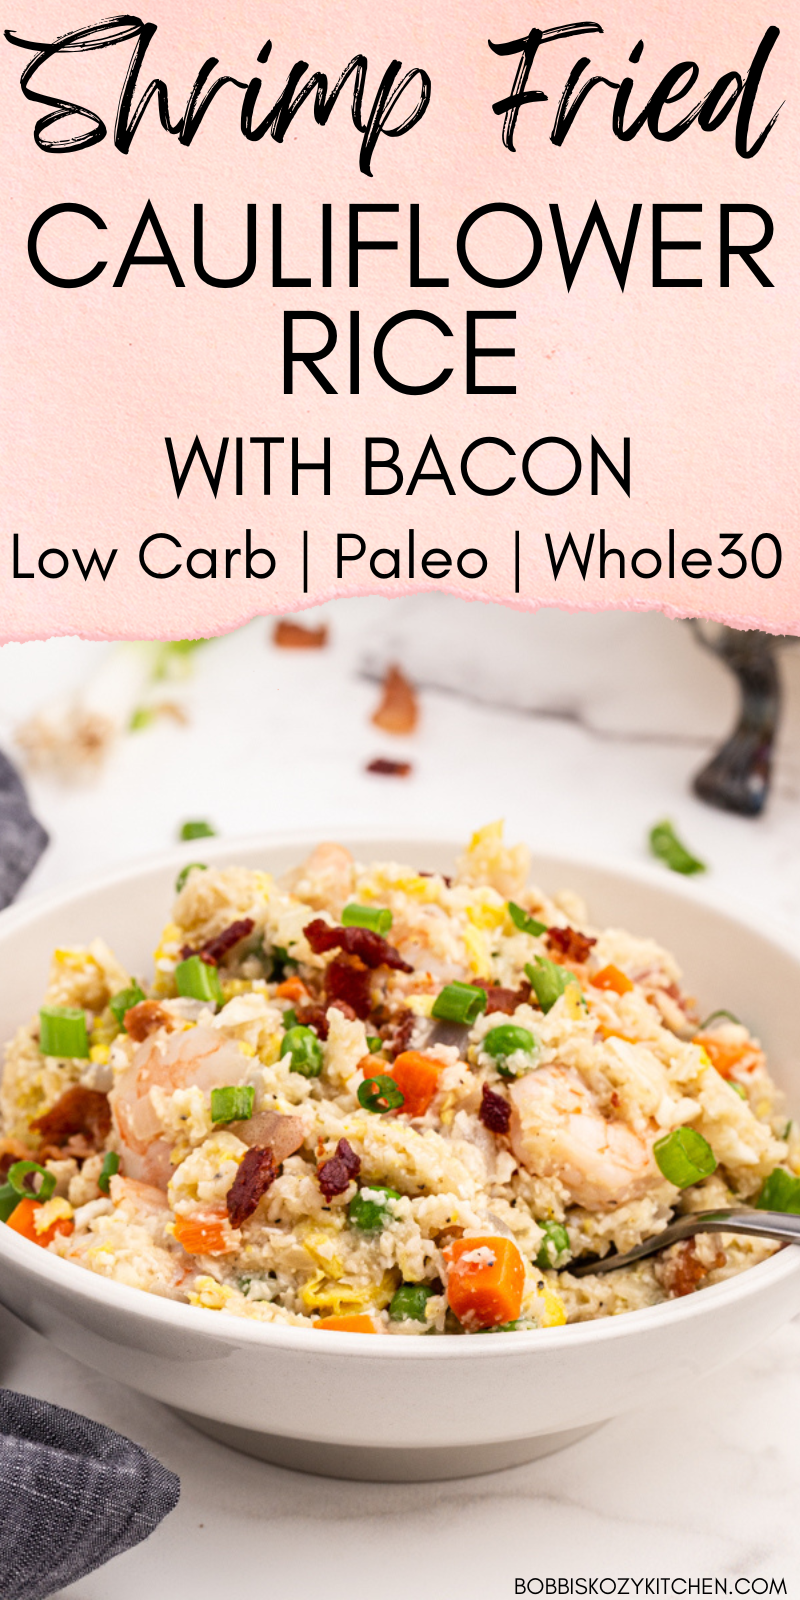 Pinterest graphic with image of Shrimp Fried Cauliflower Rice with Bacon crackers on it.